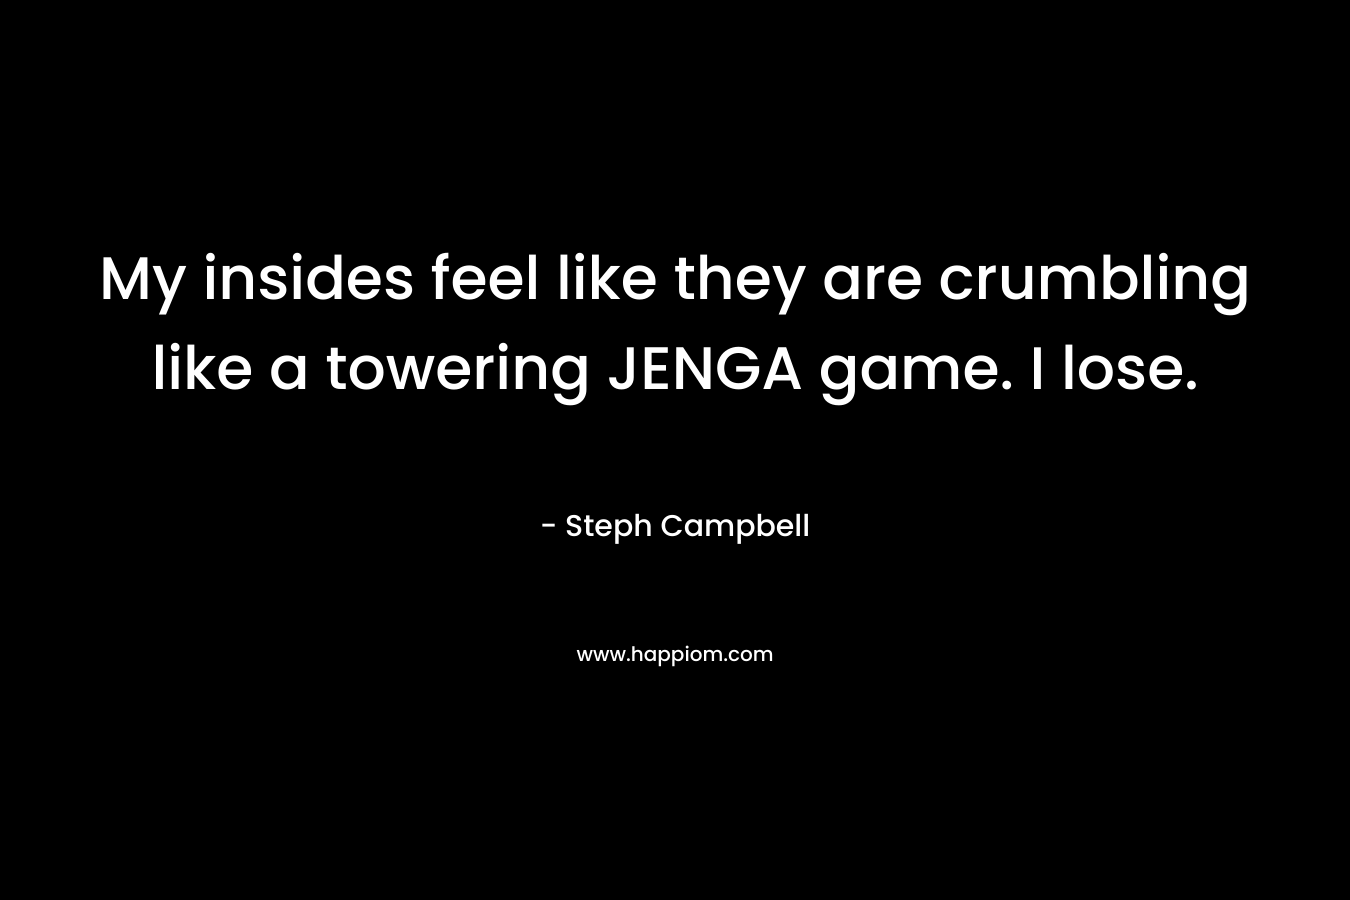 My insides feel like they are crumbling like a towering JENGA game. I lose. – Steph Campbell